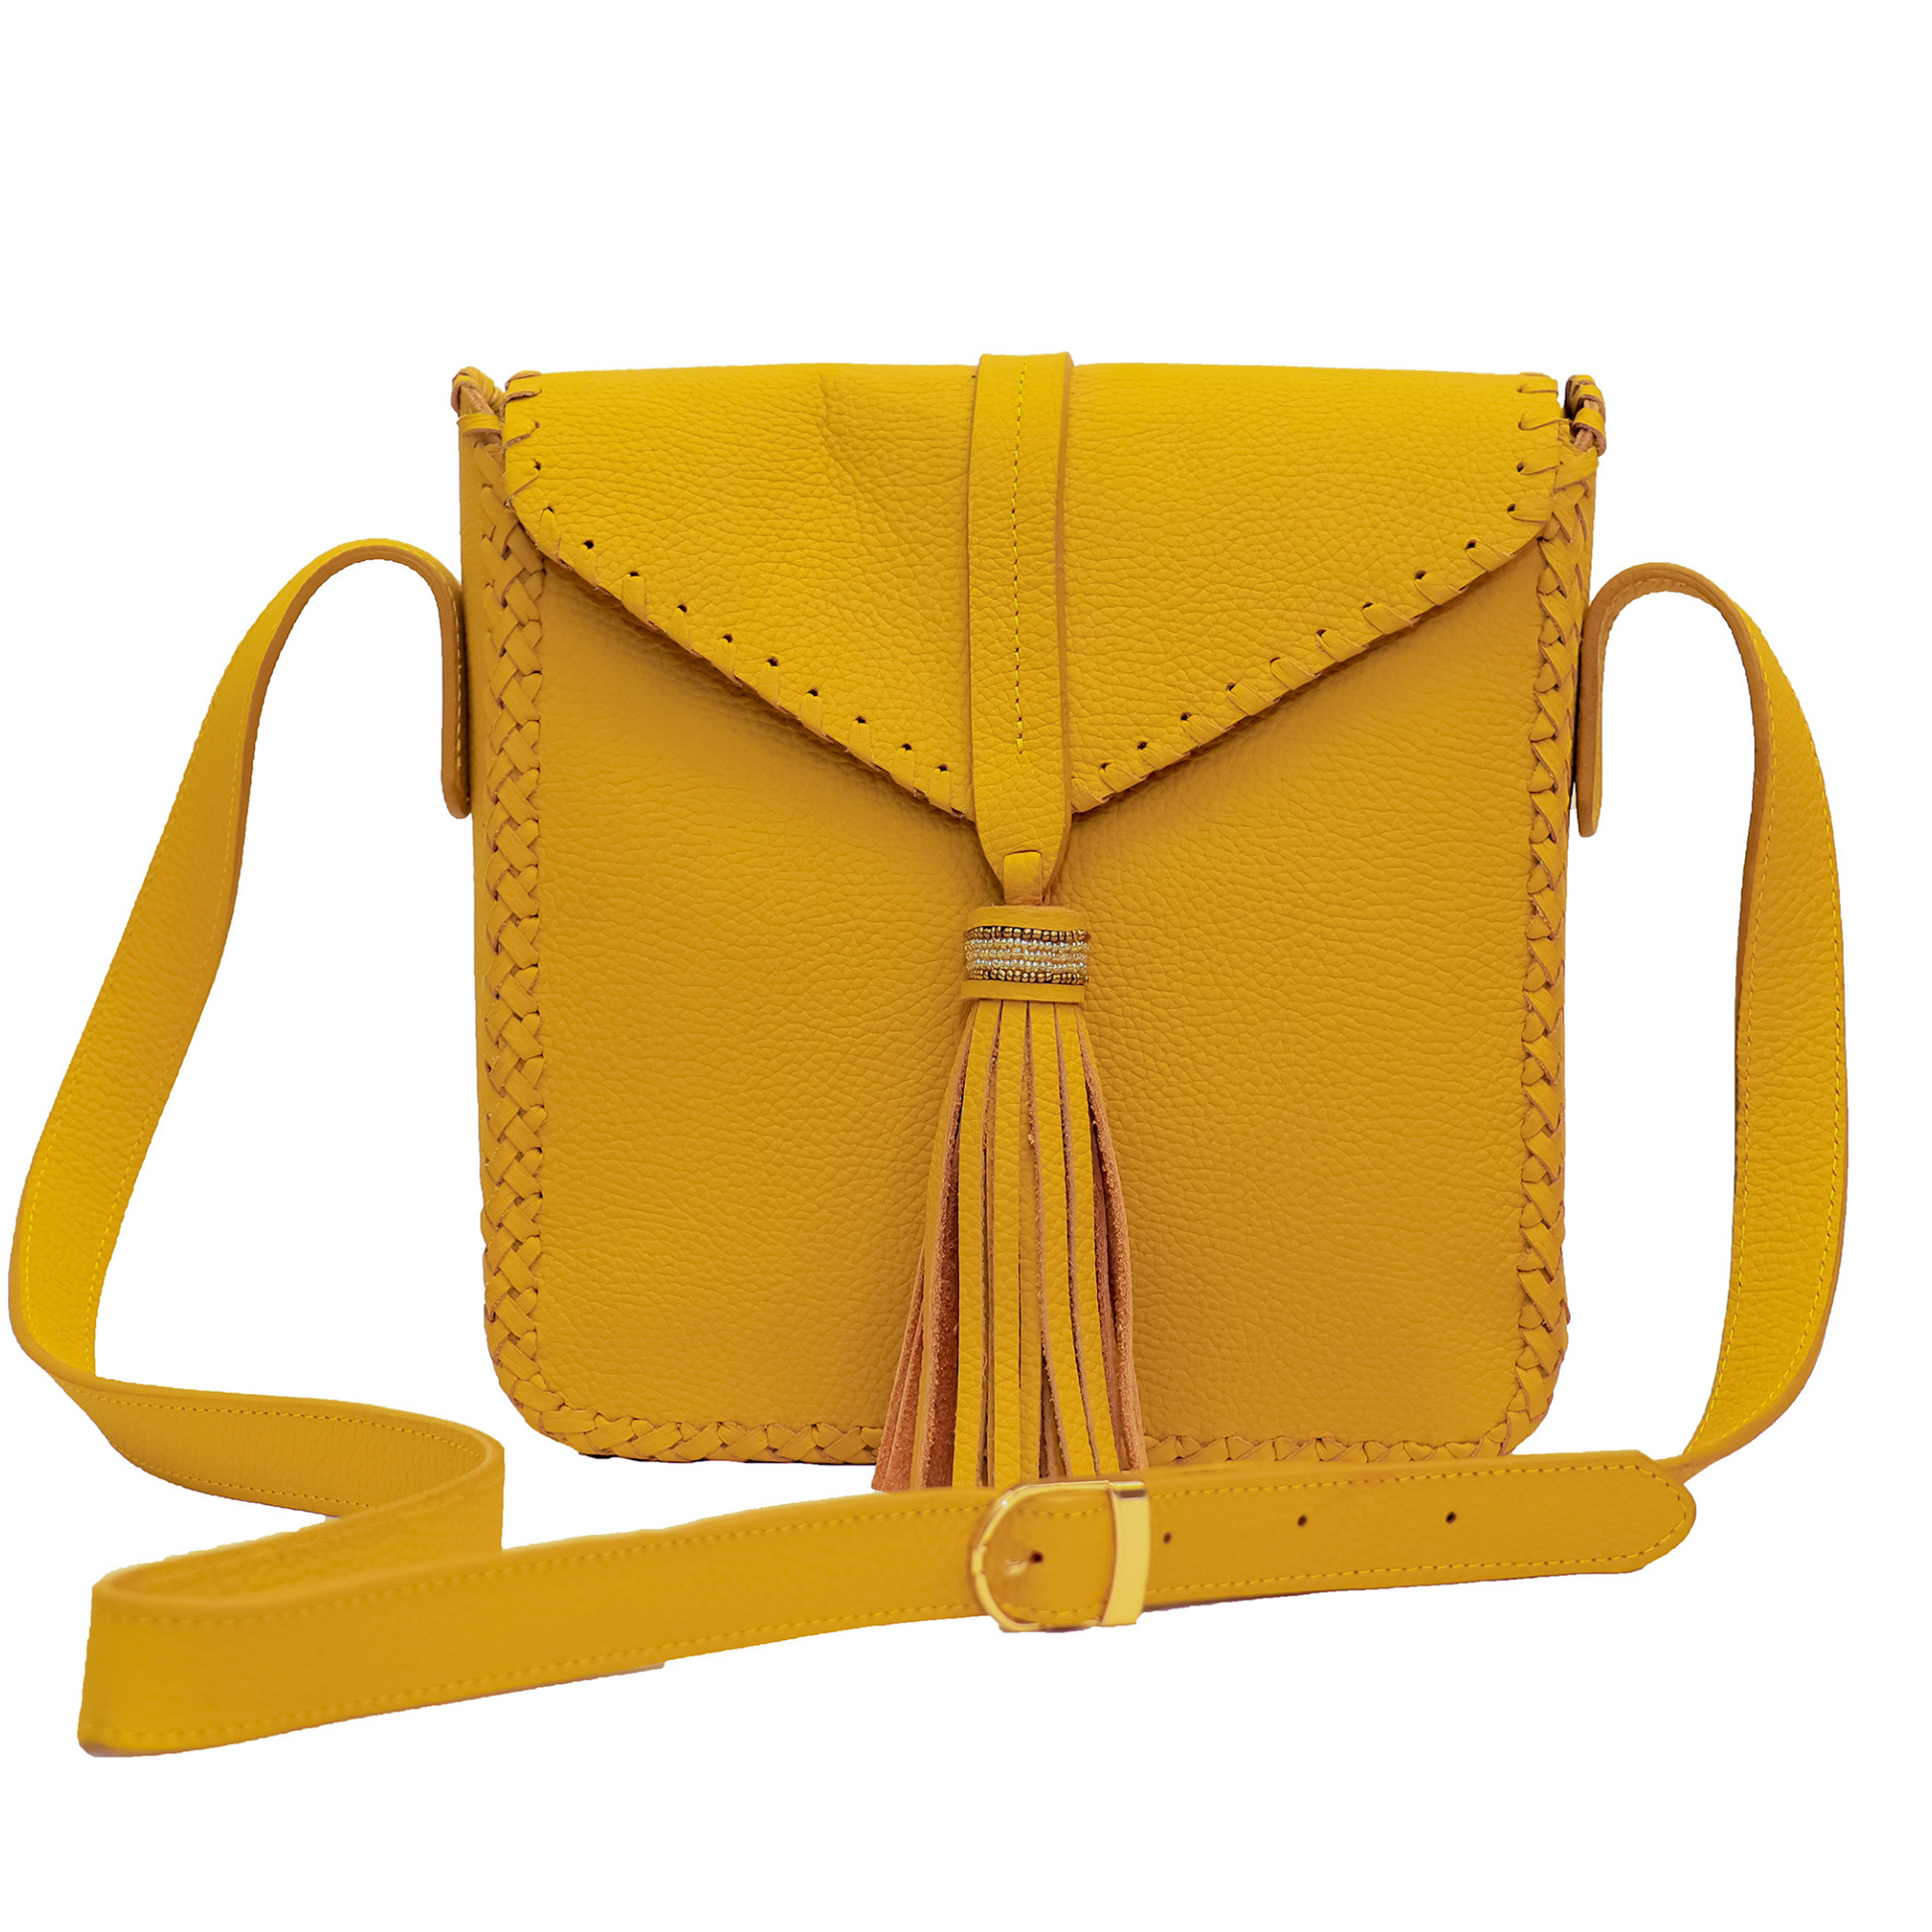 Mawimbi bag in yellow milled leather with adjustable crossbody strap